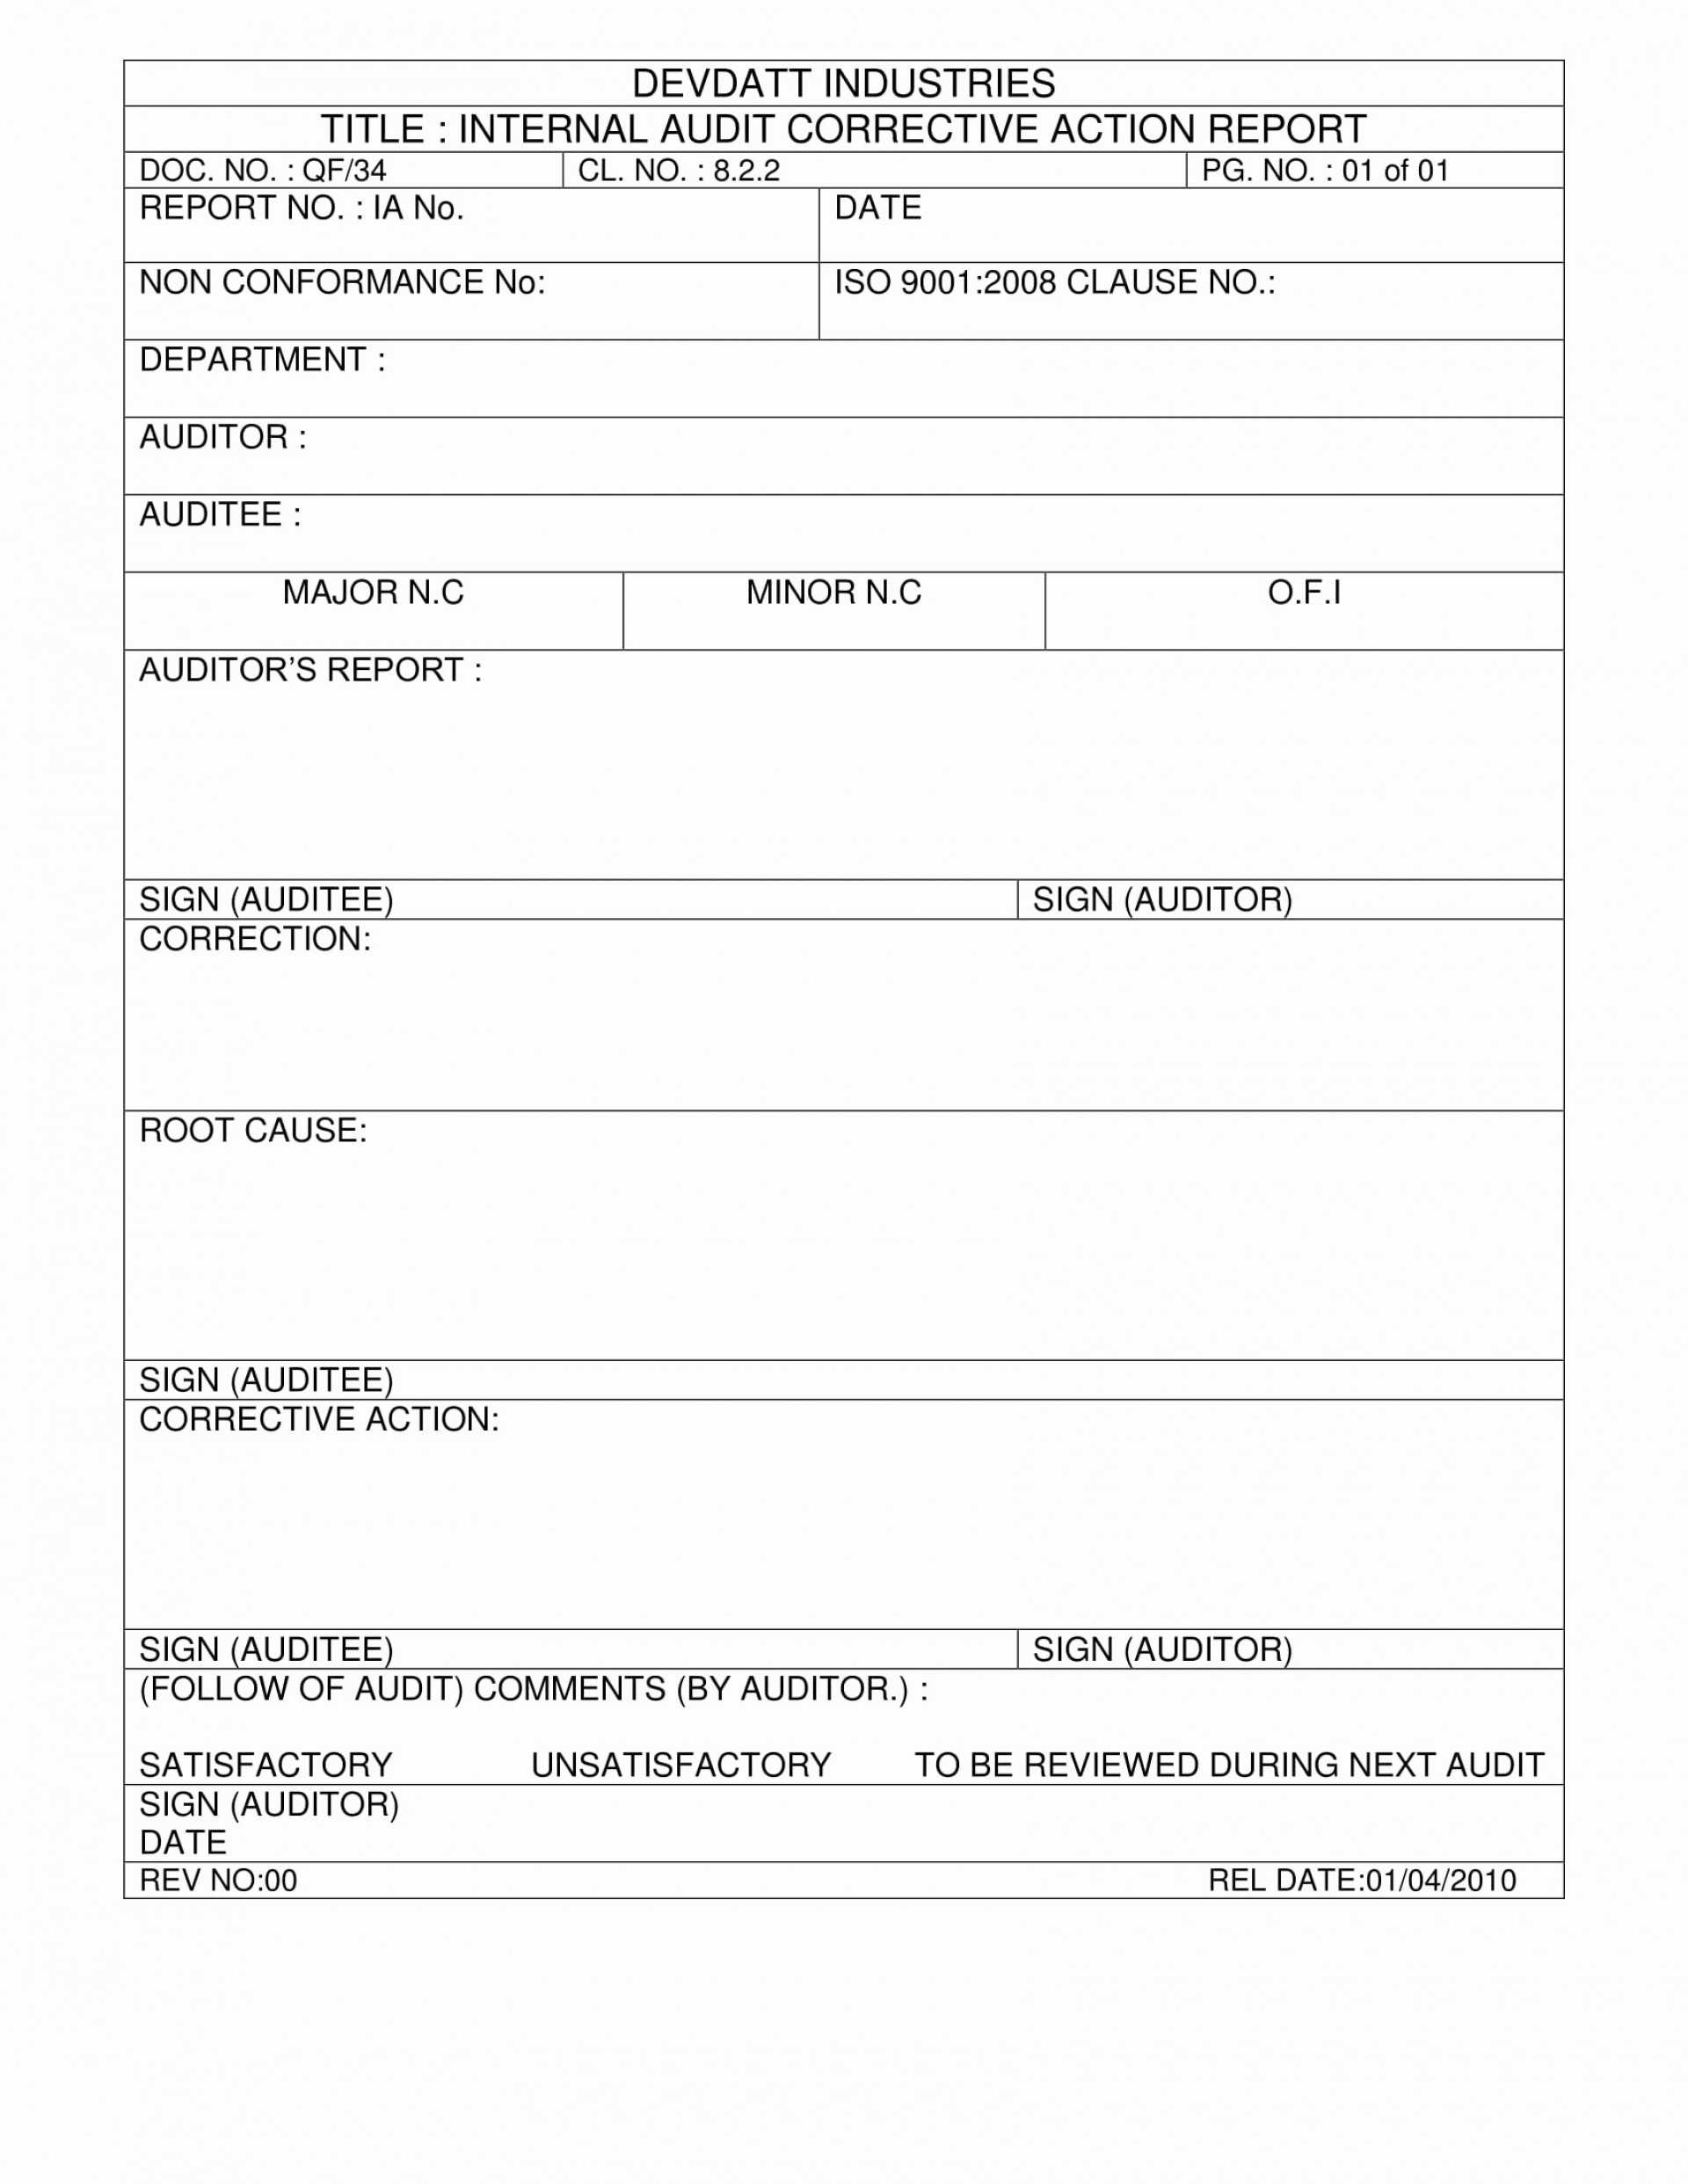 014 Corrective Action Form Template Word Ideas New Non In Non Conformance Report Form Template